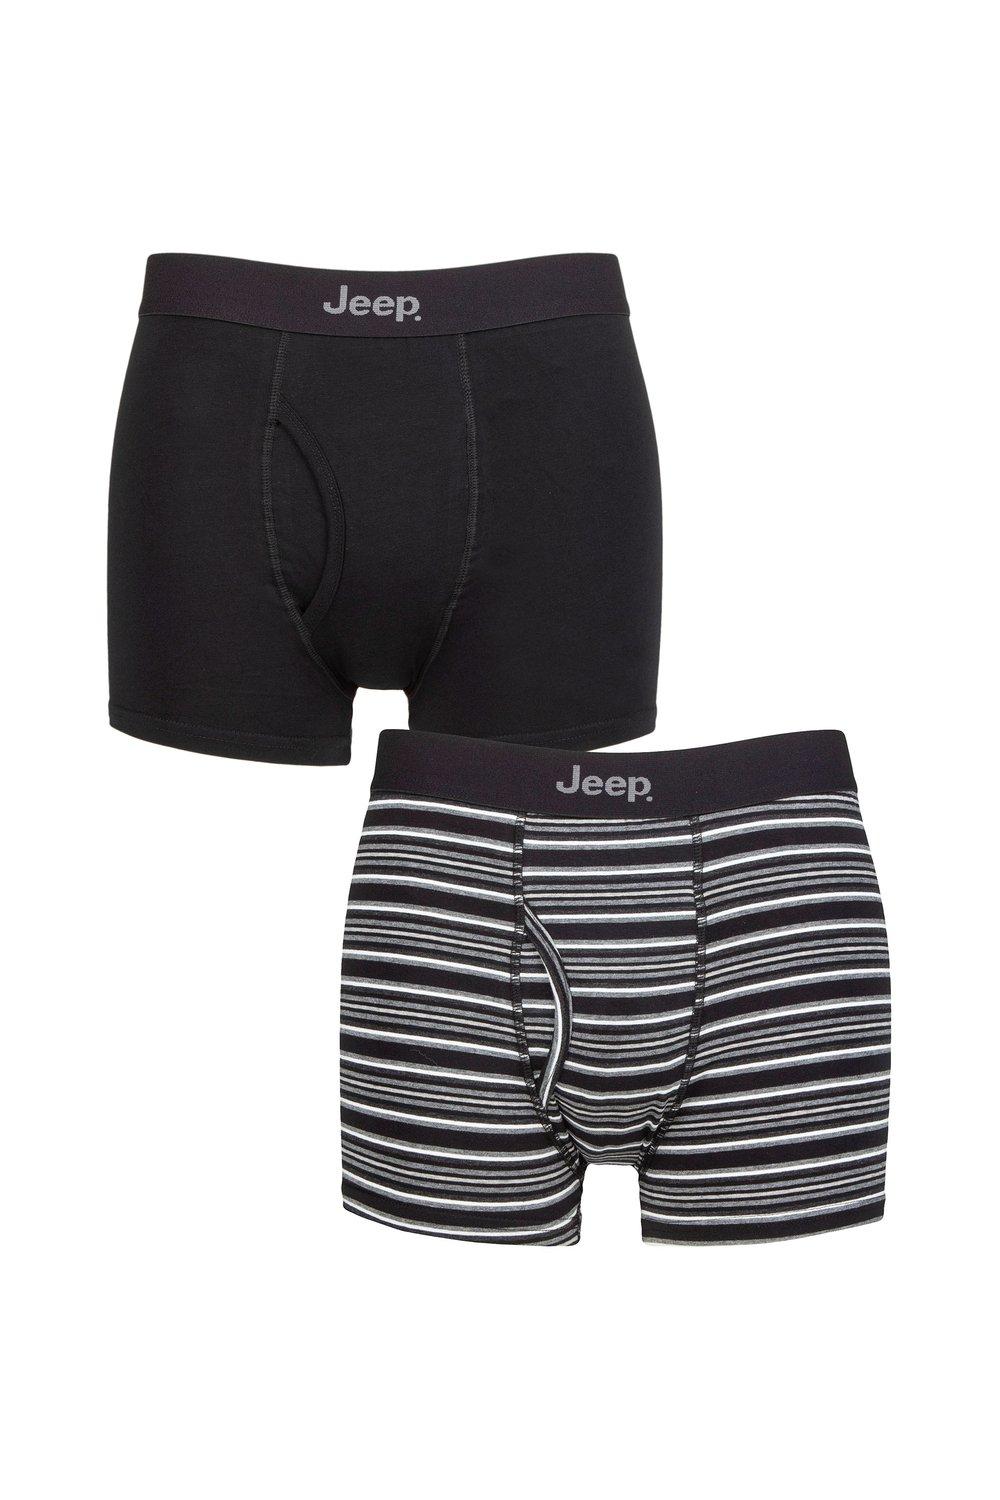 2 Pack Plain and Striped Cotton Keyhole Trunks